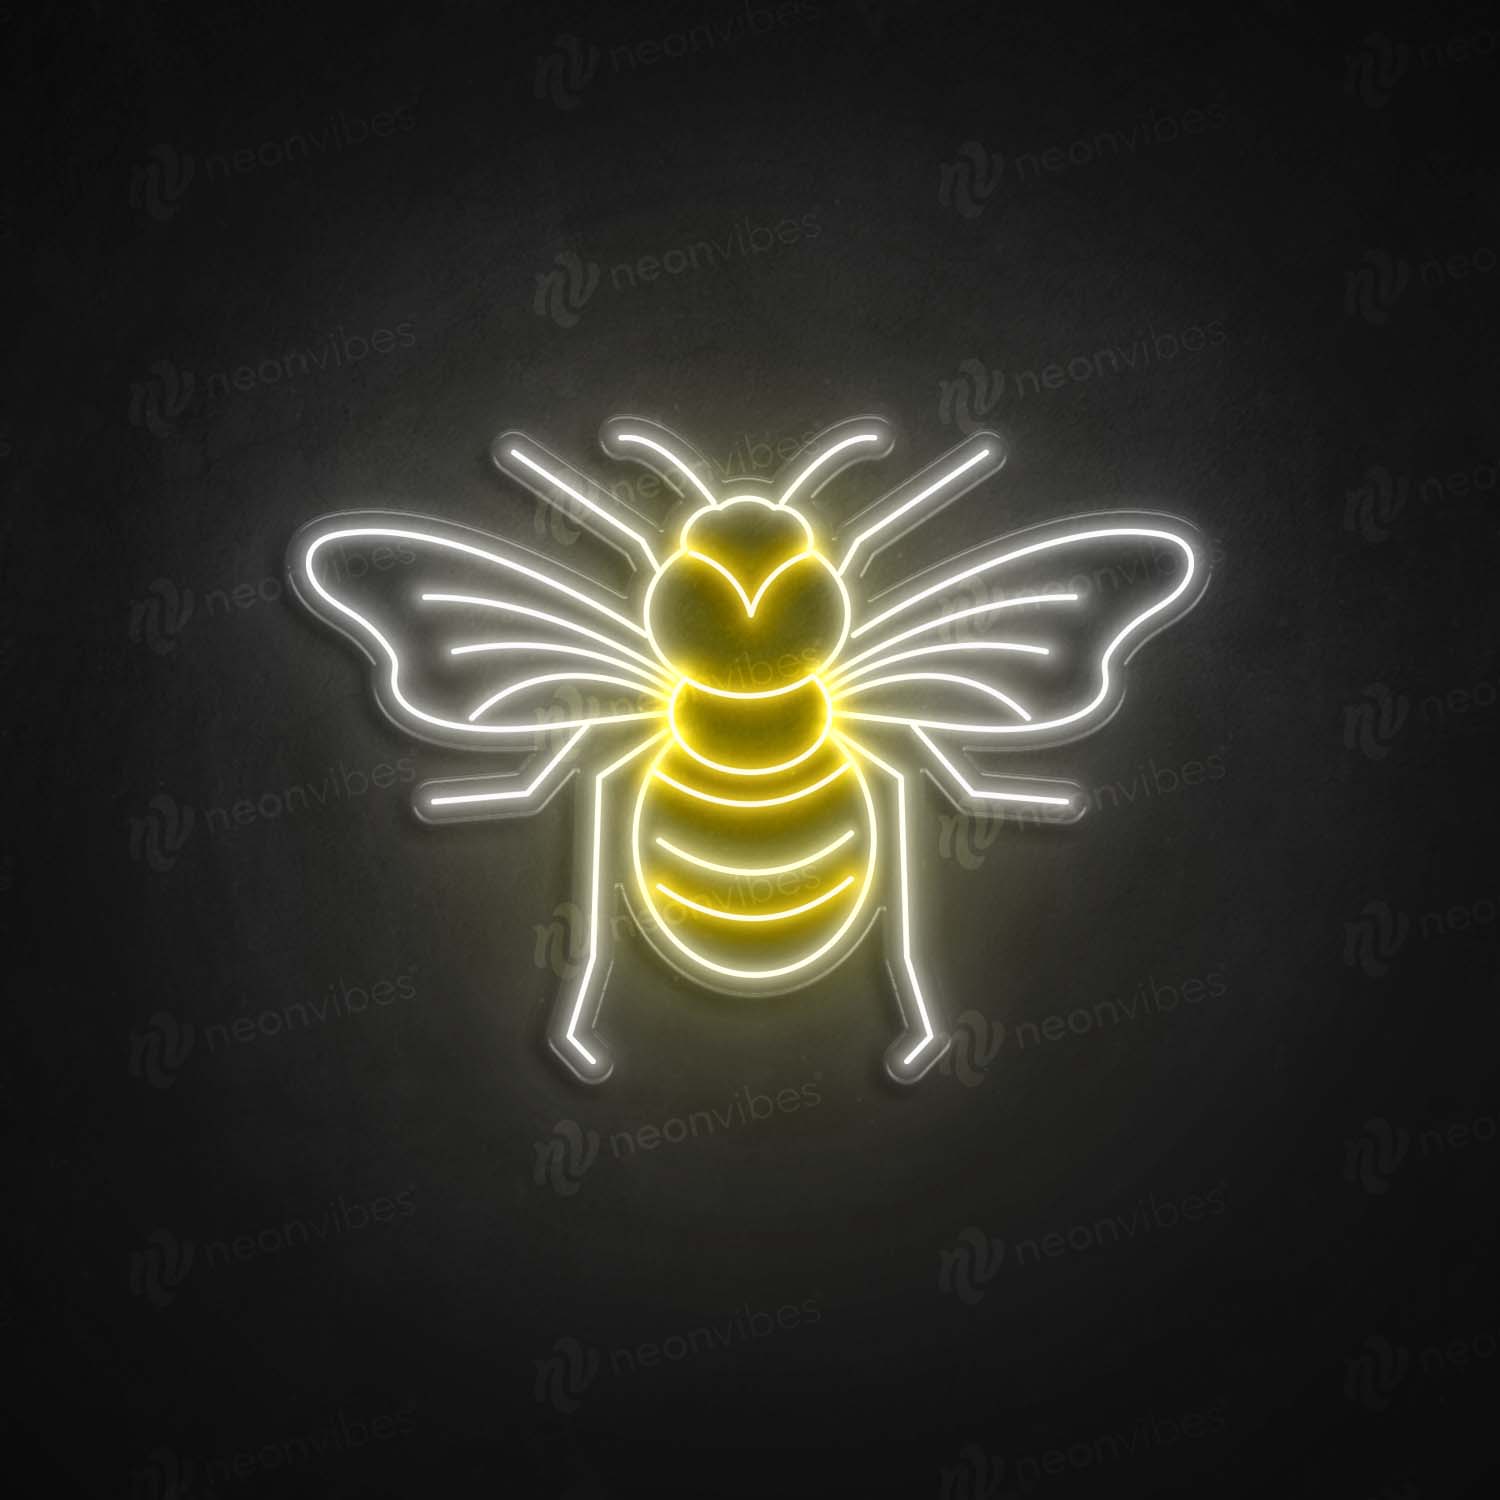 Bumble Bee V2